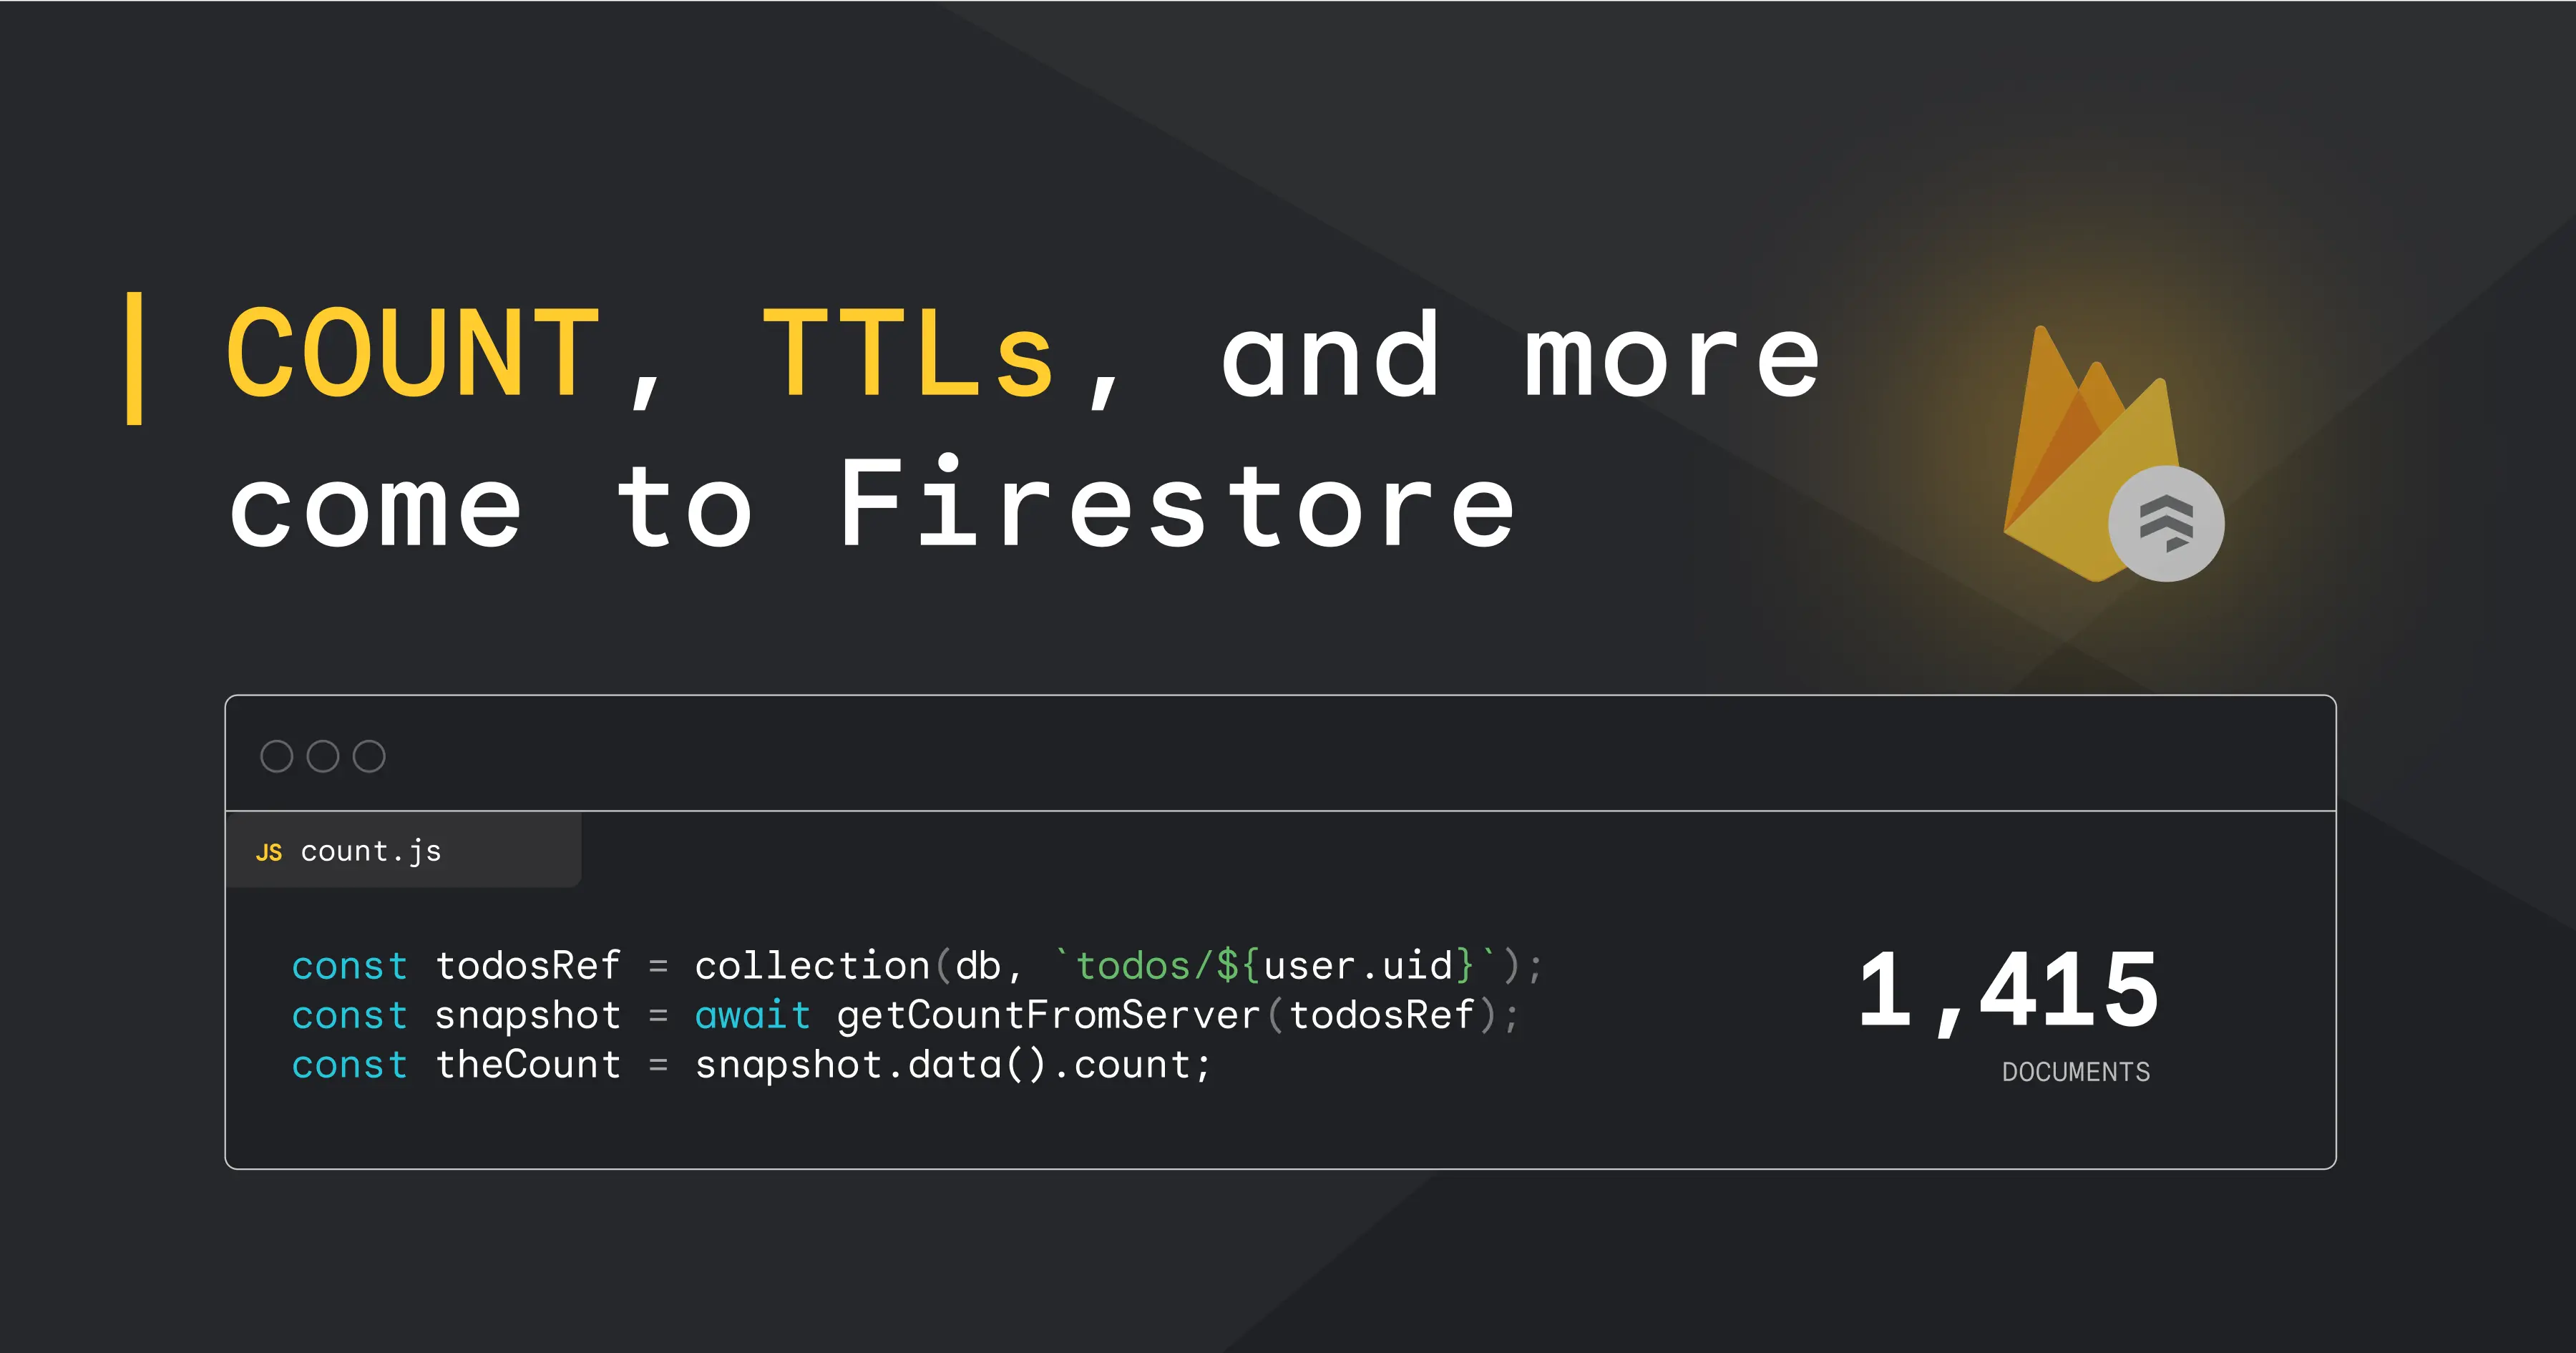 A thumbnail that shows text "Introducing COUNT, TTLs, and better scaling in Firestore" with the Firebase logo.